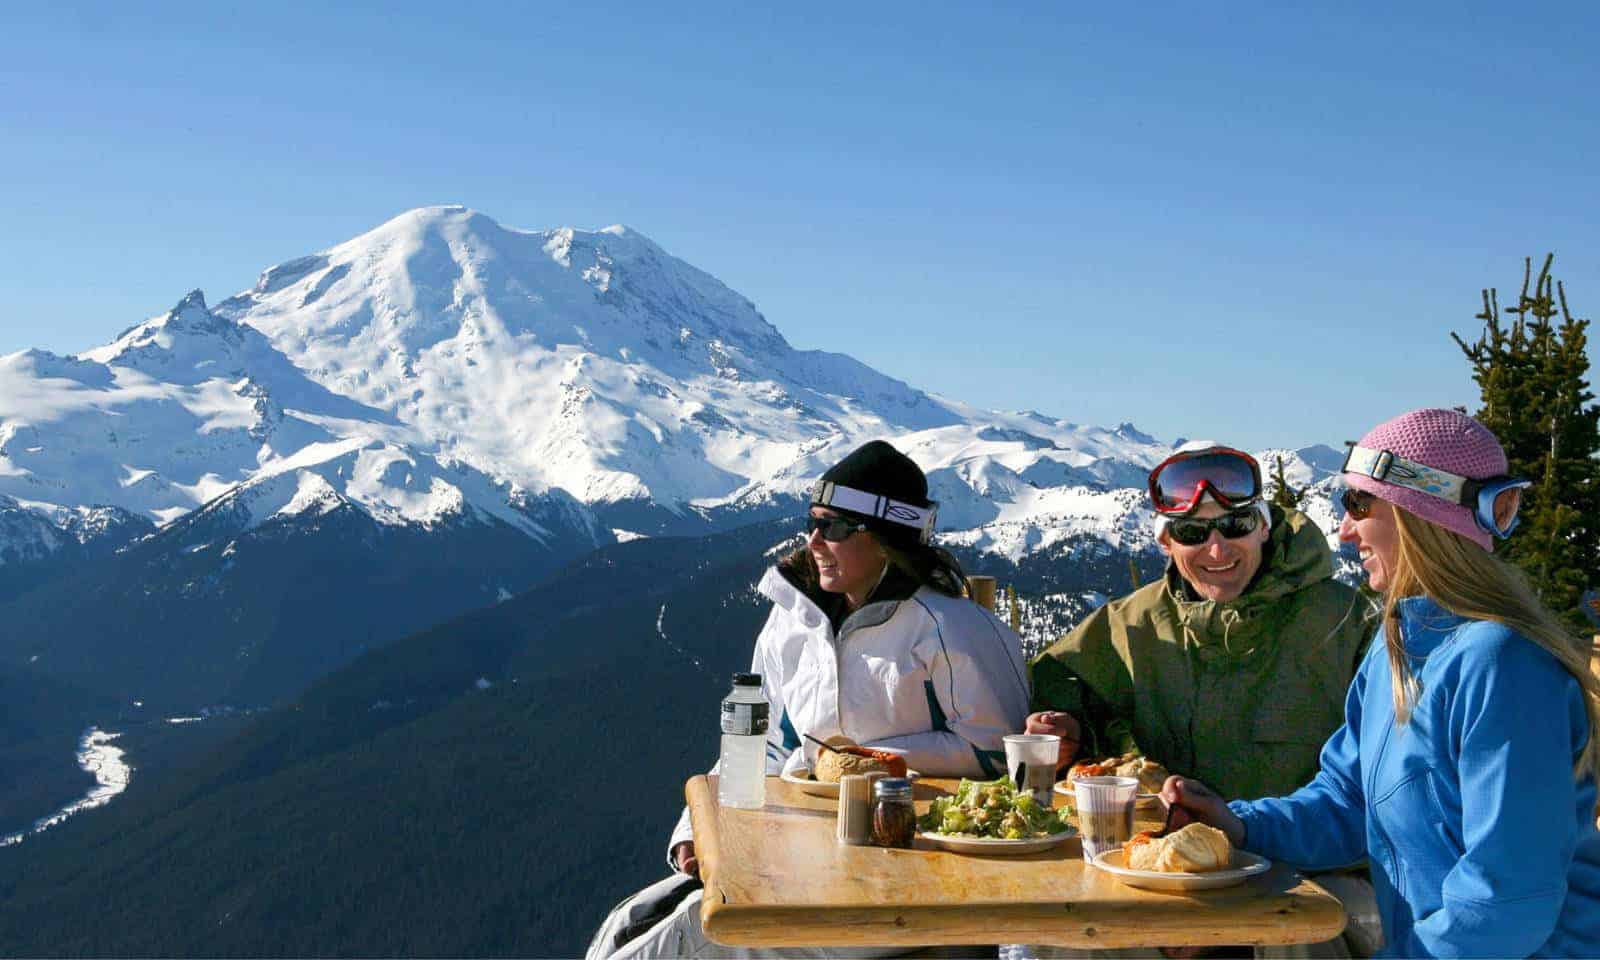 A group of people dining outdoors with a view of Mt Rainier